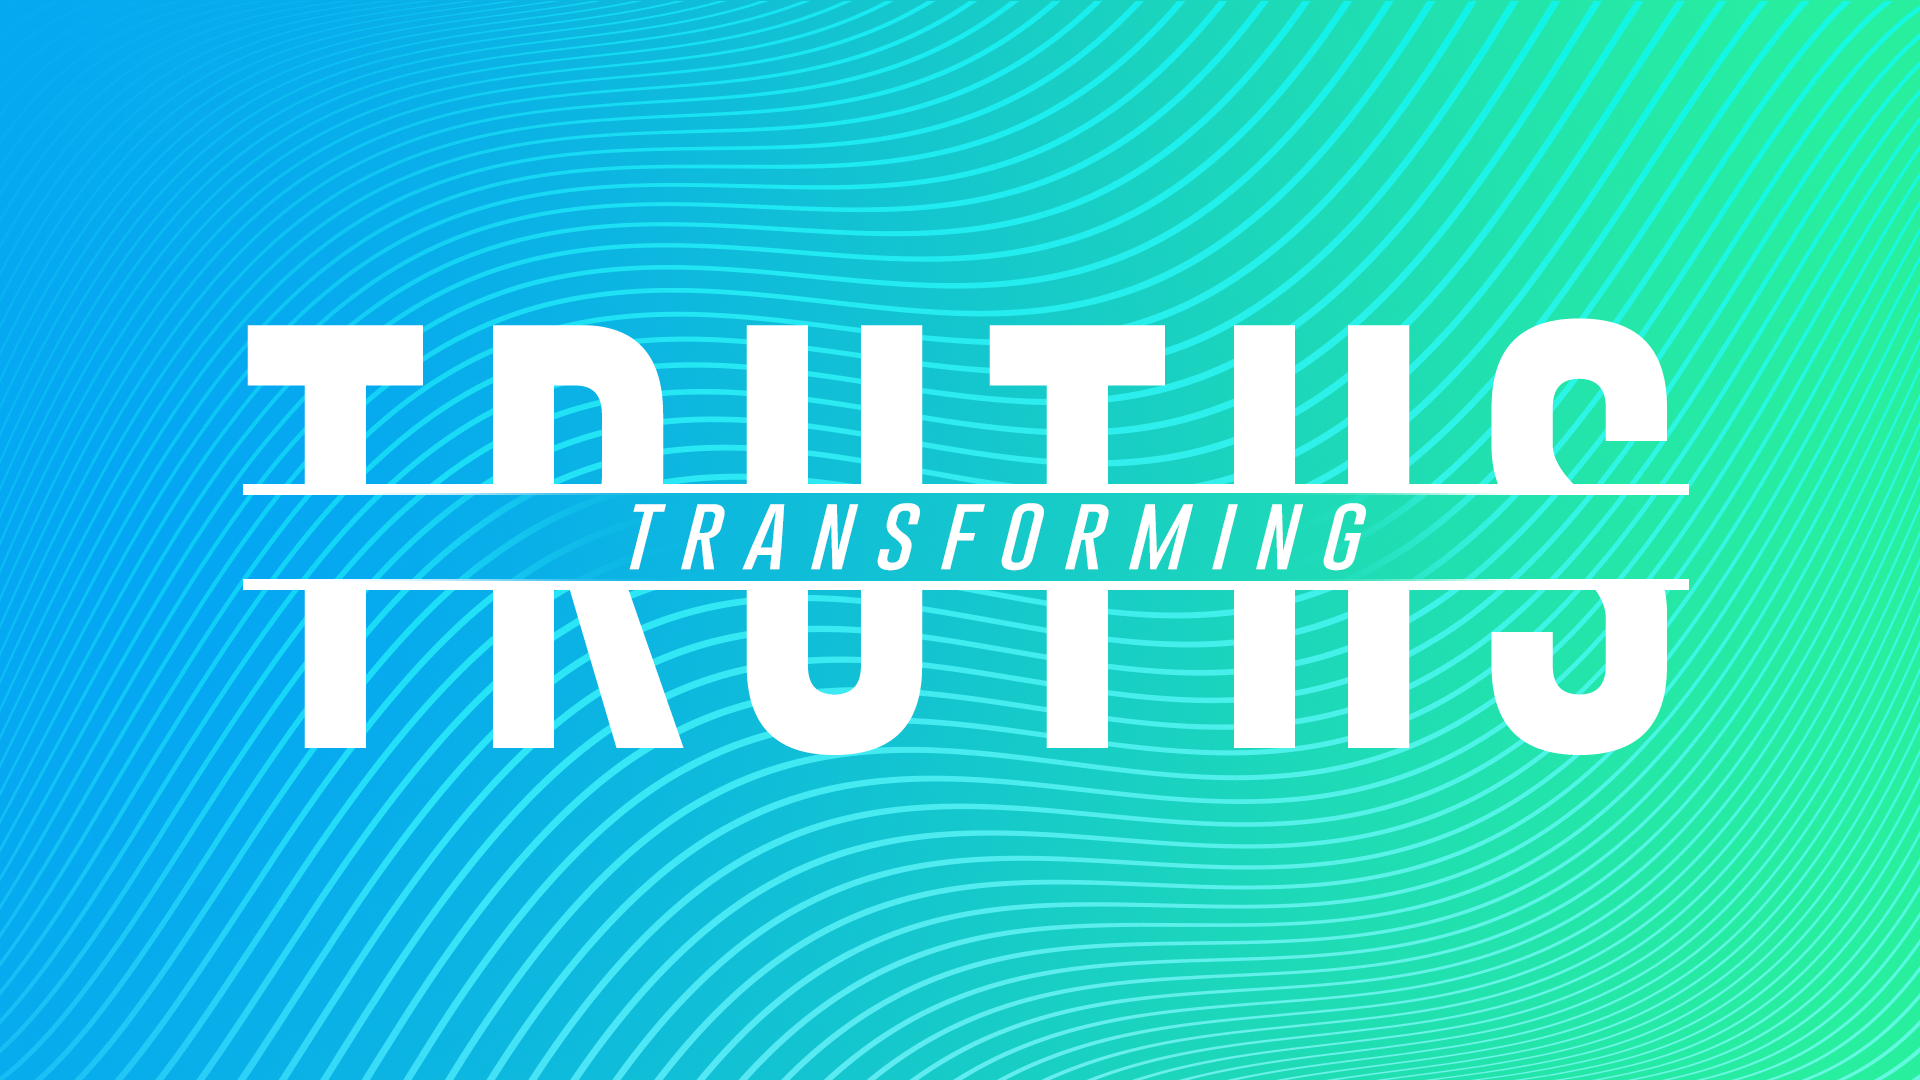 August 16, 2020 – Transforming Truths